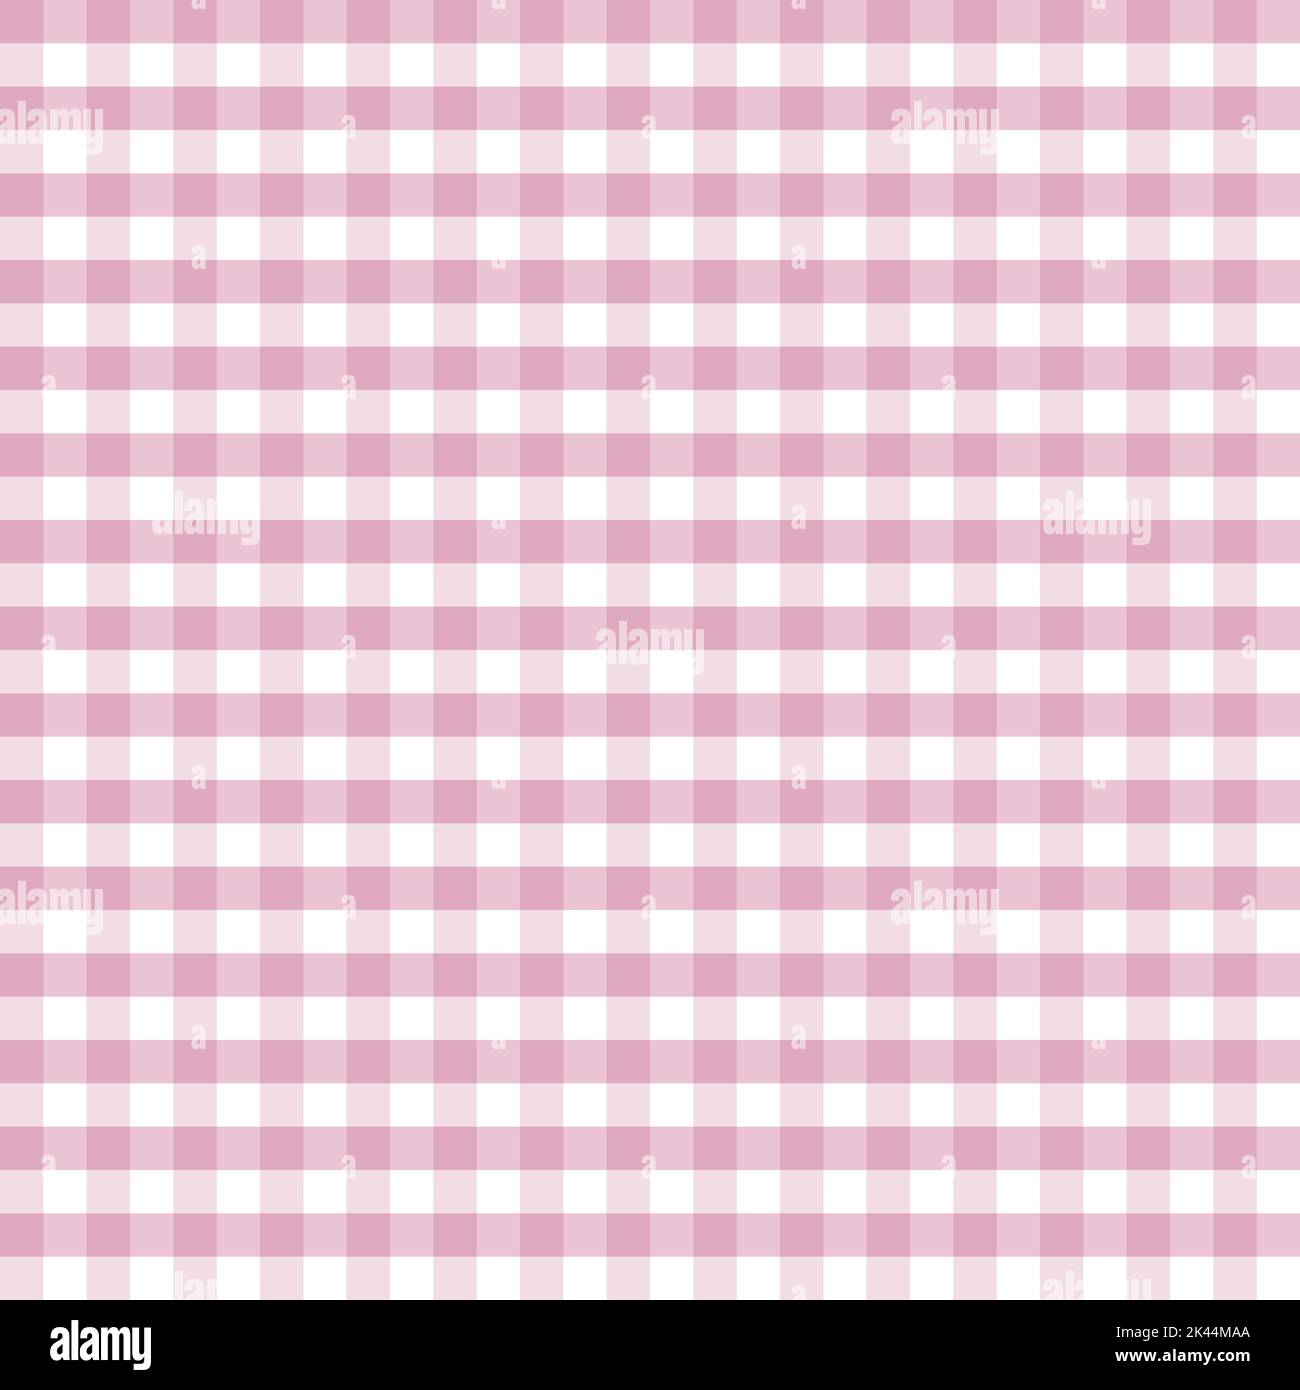 Pink Gingham pattern for clothes, tablecloths, plaid, shirts, dresses, paper, blankets, bedding, quilts and textile products. Vector illustration. Stock Vector